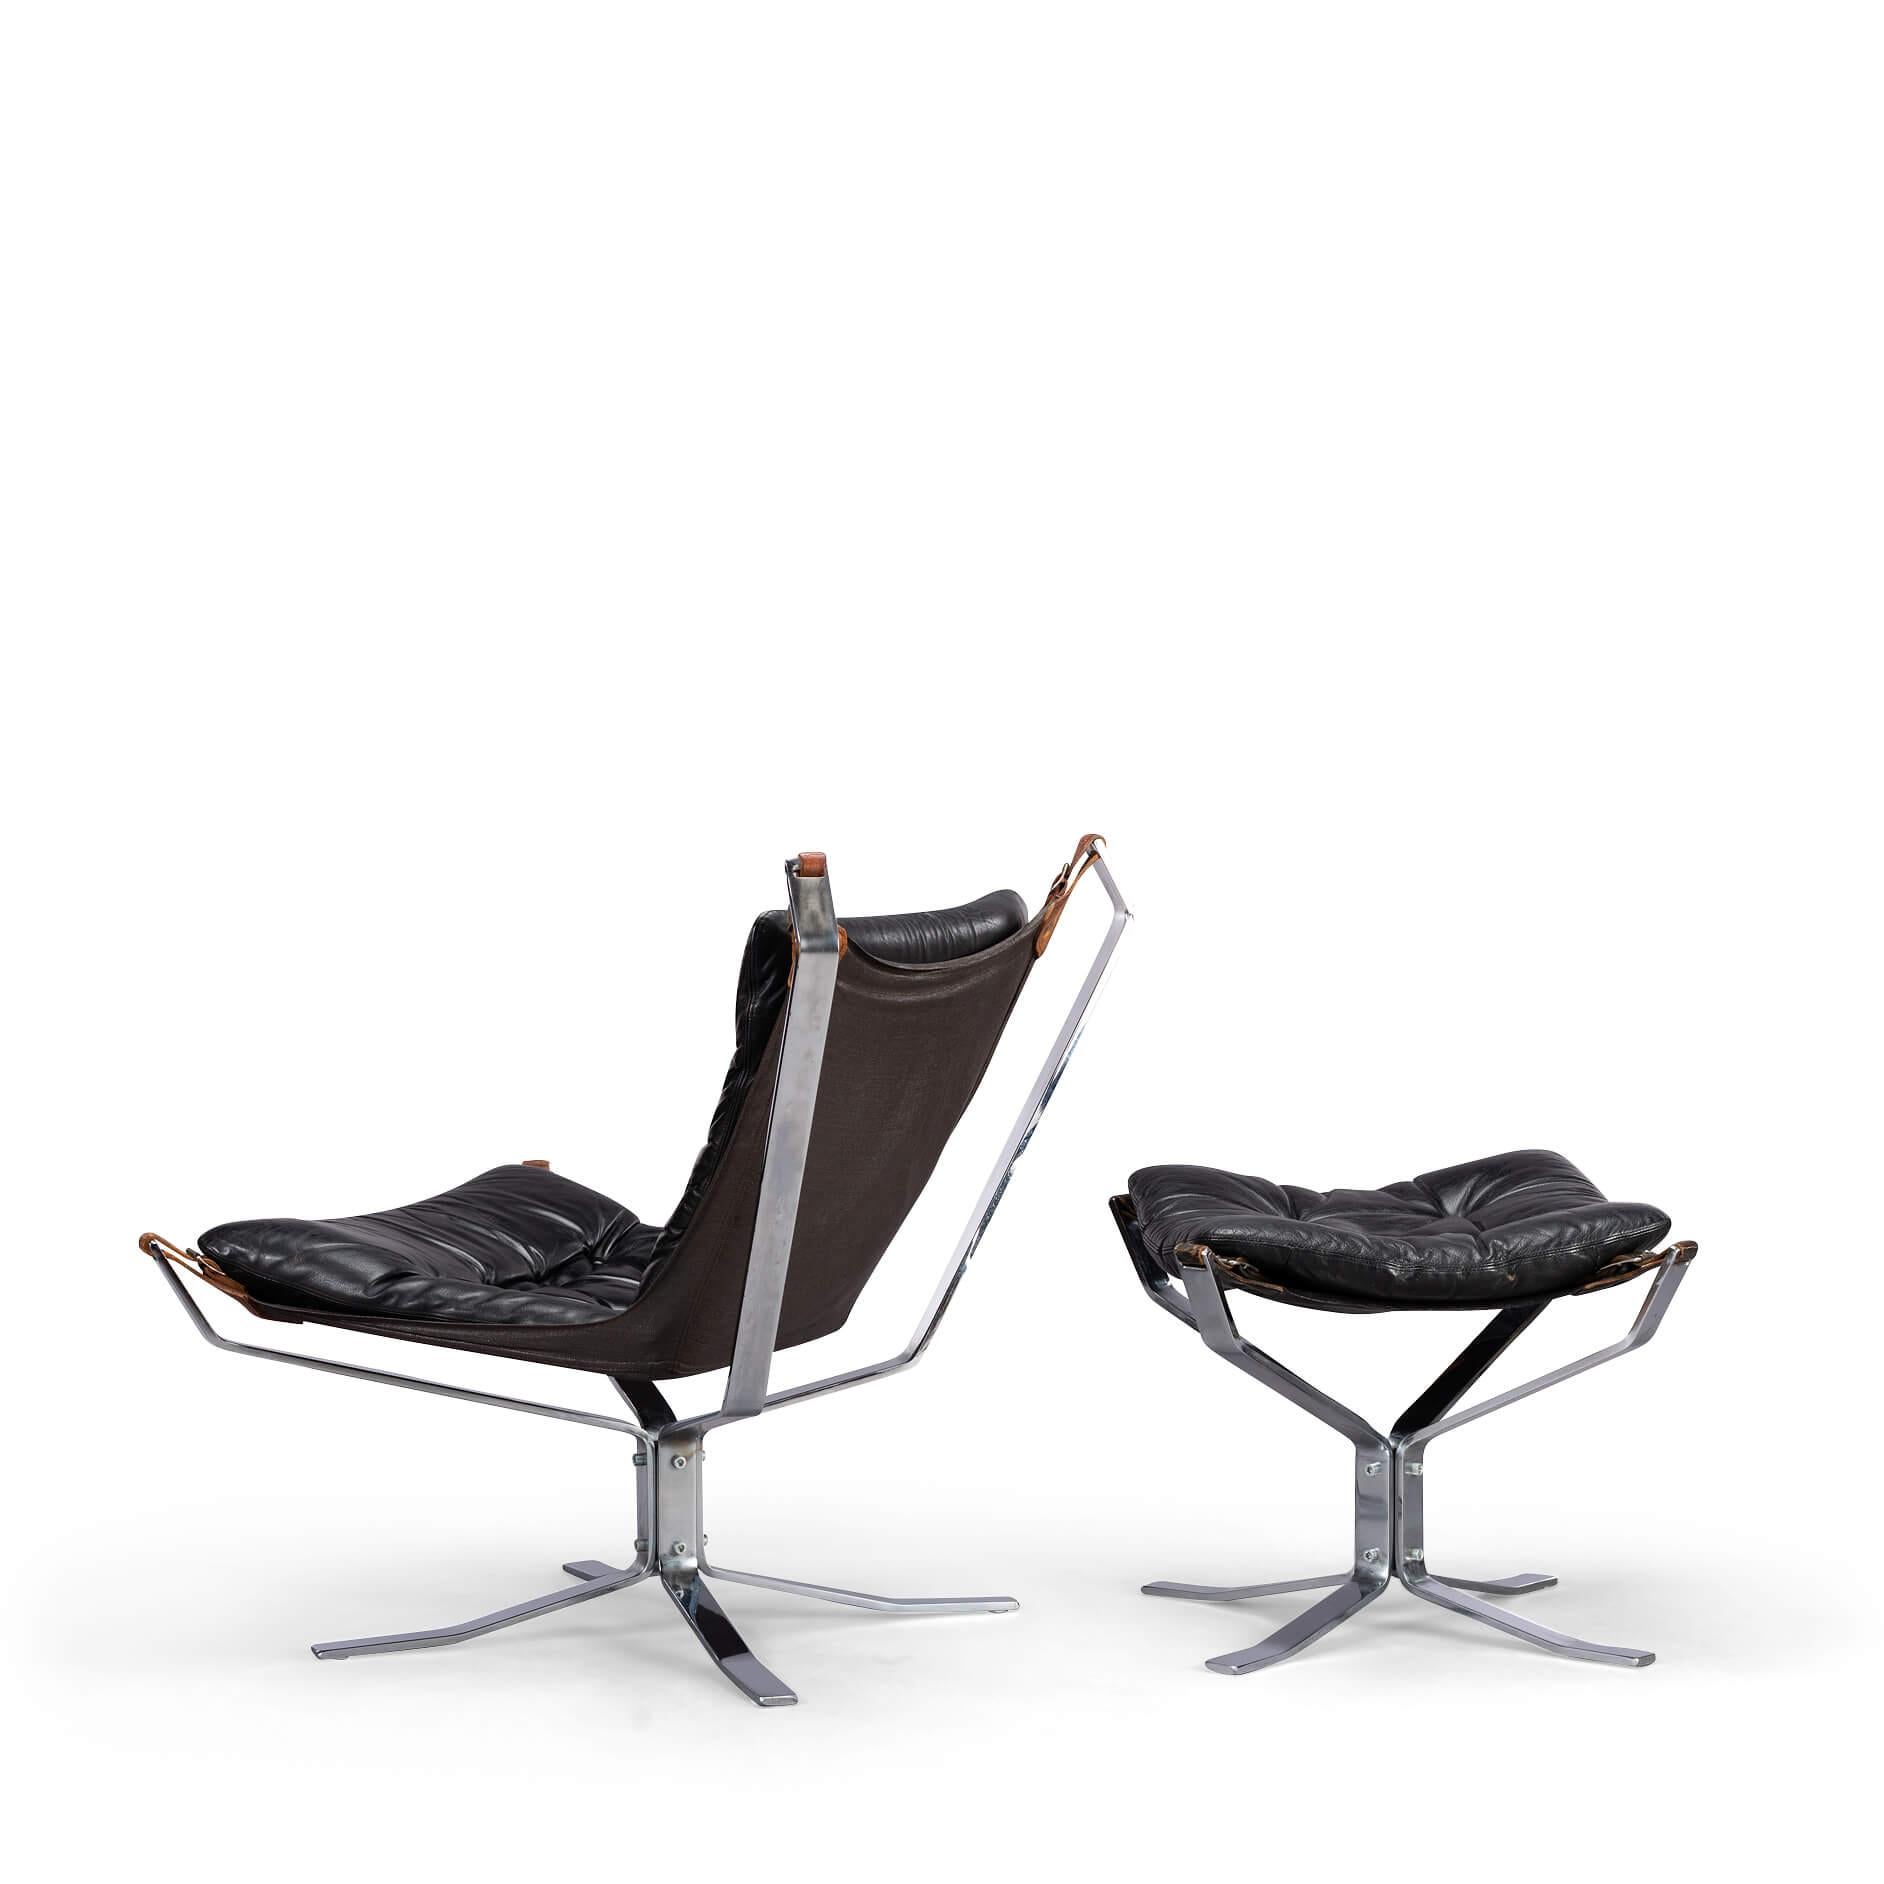 An incredibly rare complete and original Falcon lounge set by Mid century Norwegian designer Sigurd Ressell for Vatne Møbler. Featuring the original chrome frame version of the chair design in black leather a matching footstool and the original